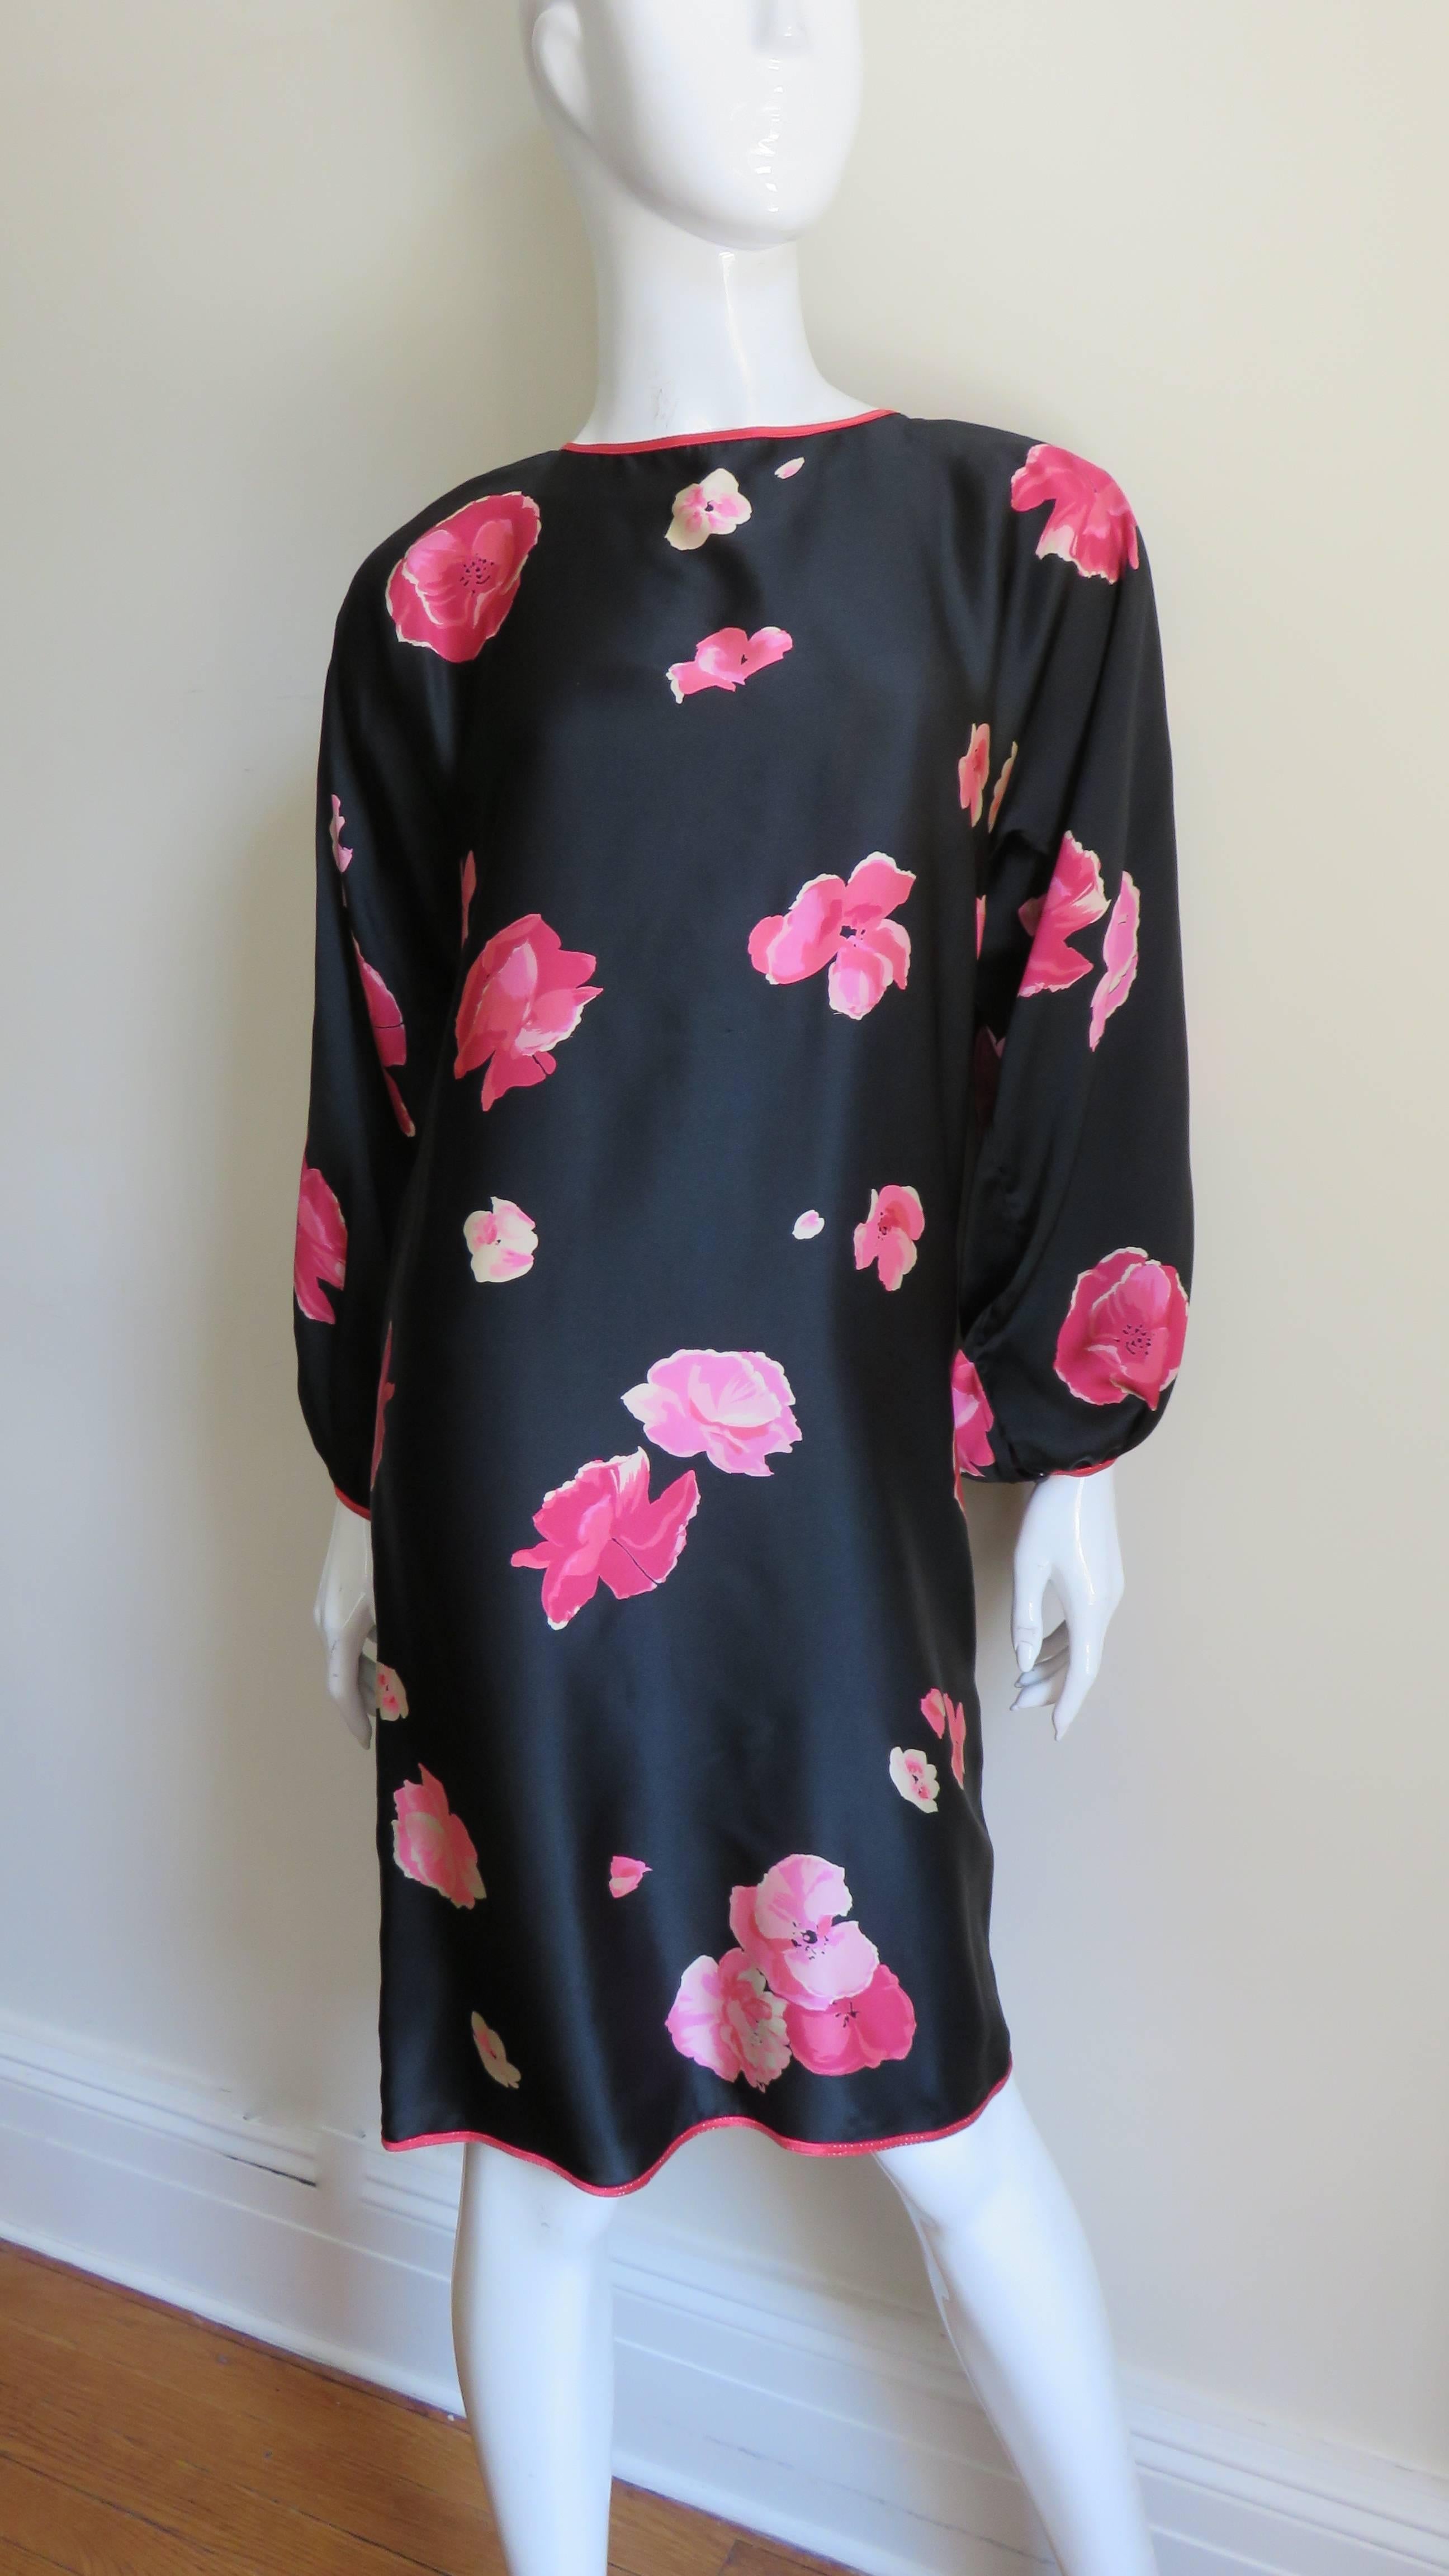 Simple dress from Geoffrey Beene in a black silk fabric with various flowers in pinks. The dress front is one piece of fabric and has a rounded neckline, dolman balloon sleeves with one button closure, keyhole back with tie at the neck and slightly